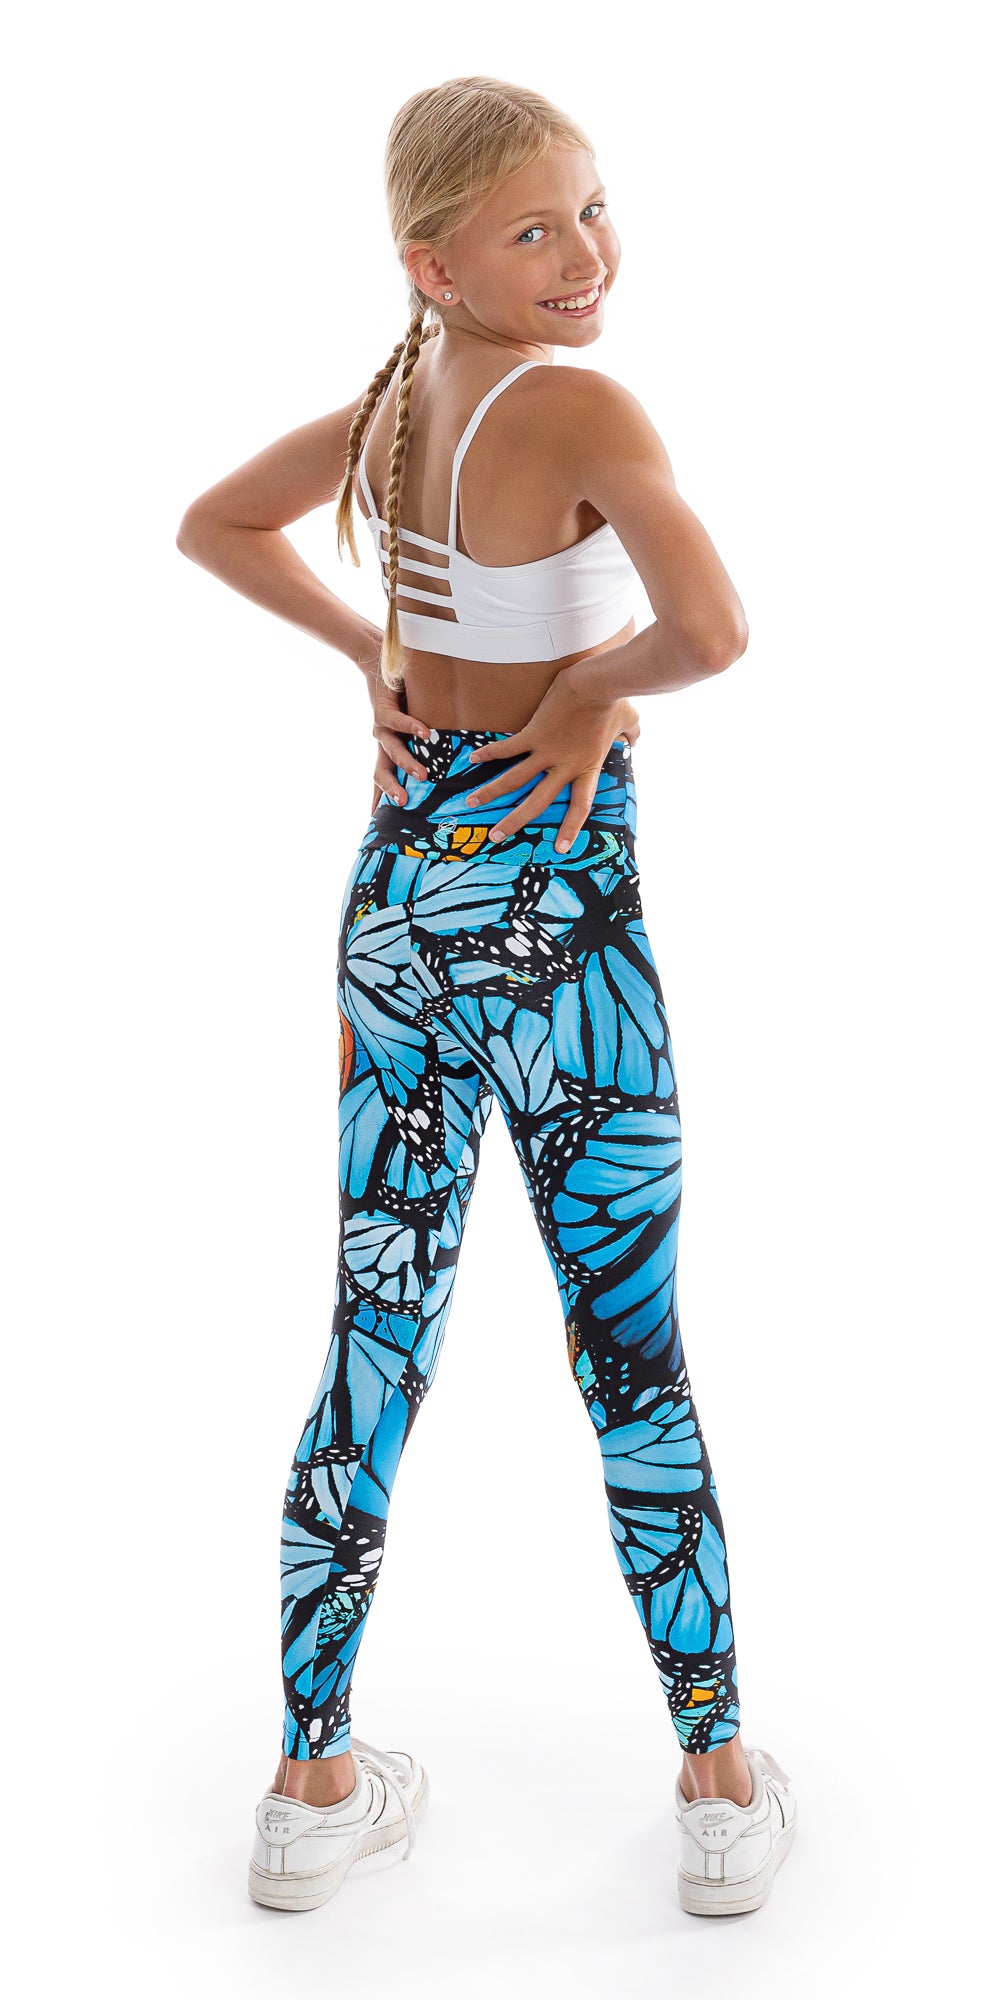 Full body back view of girl teenager in blue and black animal print Tween JH Butterfly Ultra High Waist 7/8 Leggings standing with feet apart and putting both hands on waist while looking back to smile for the camera